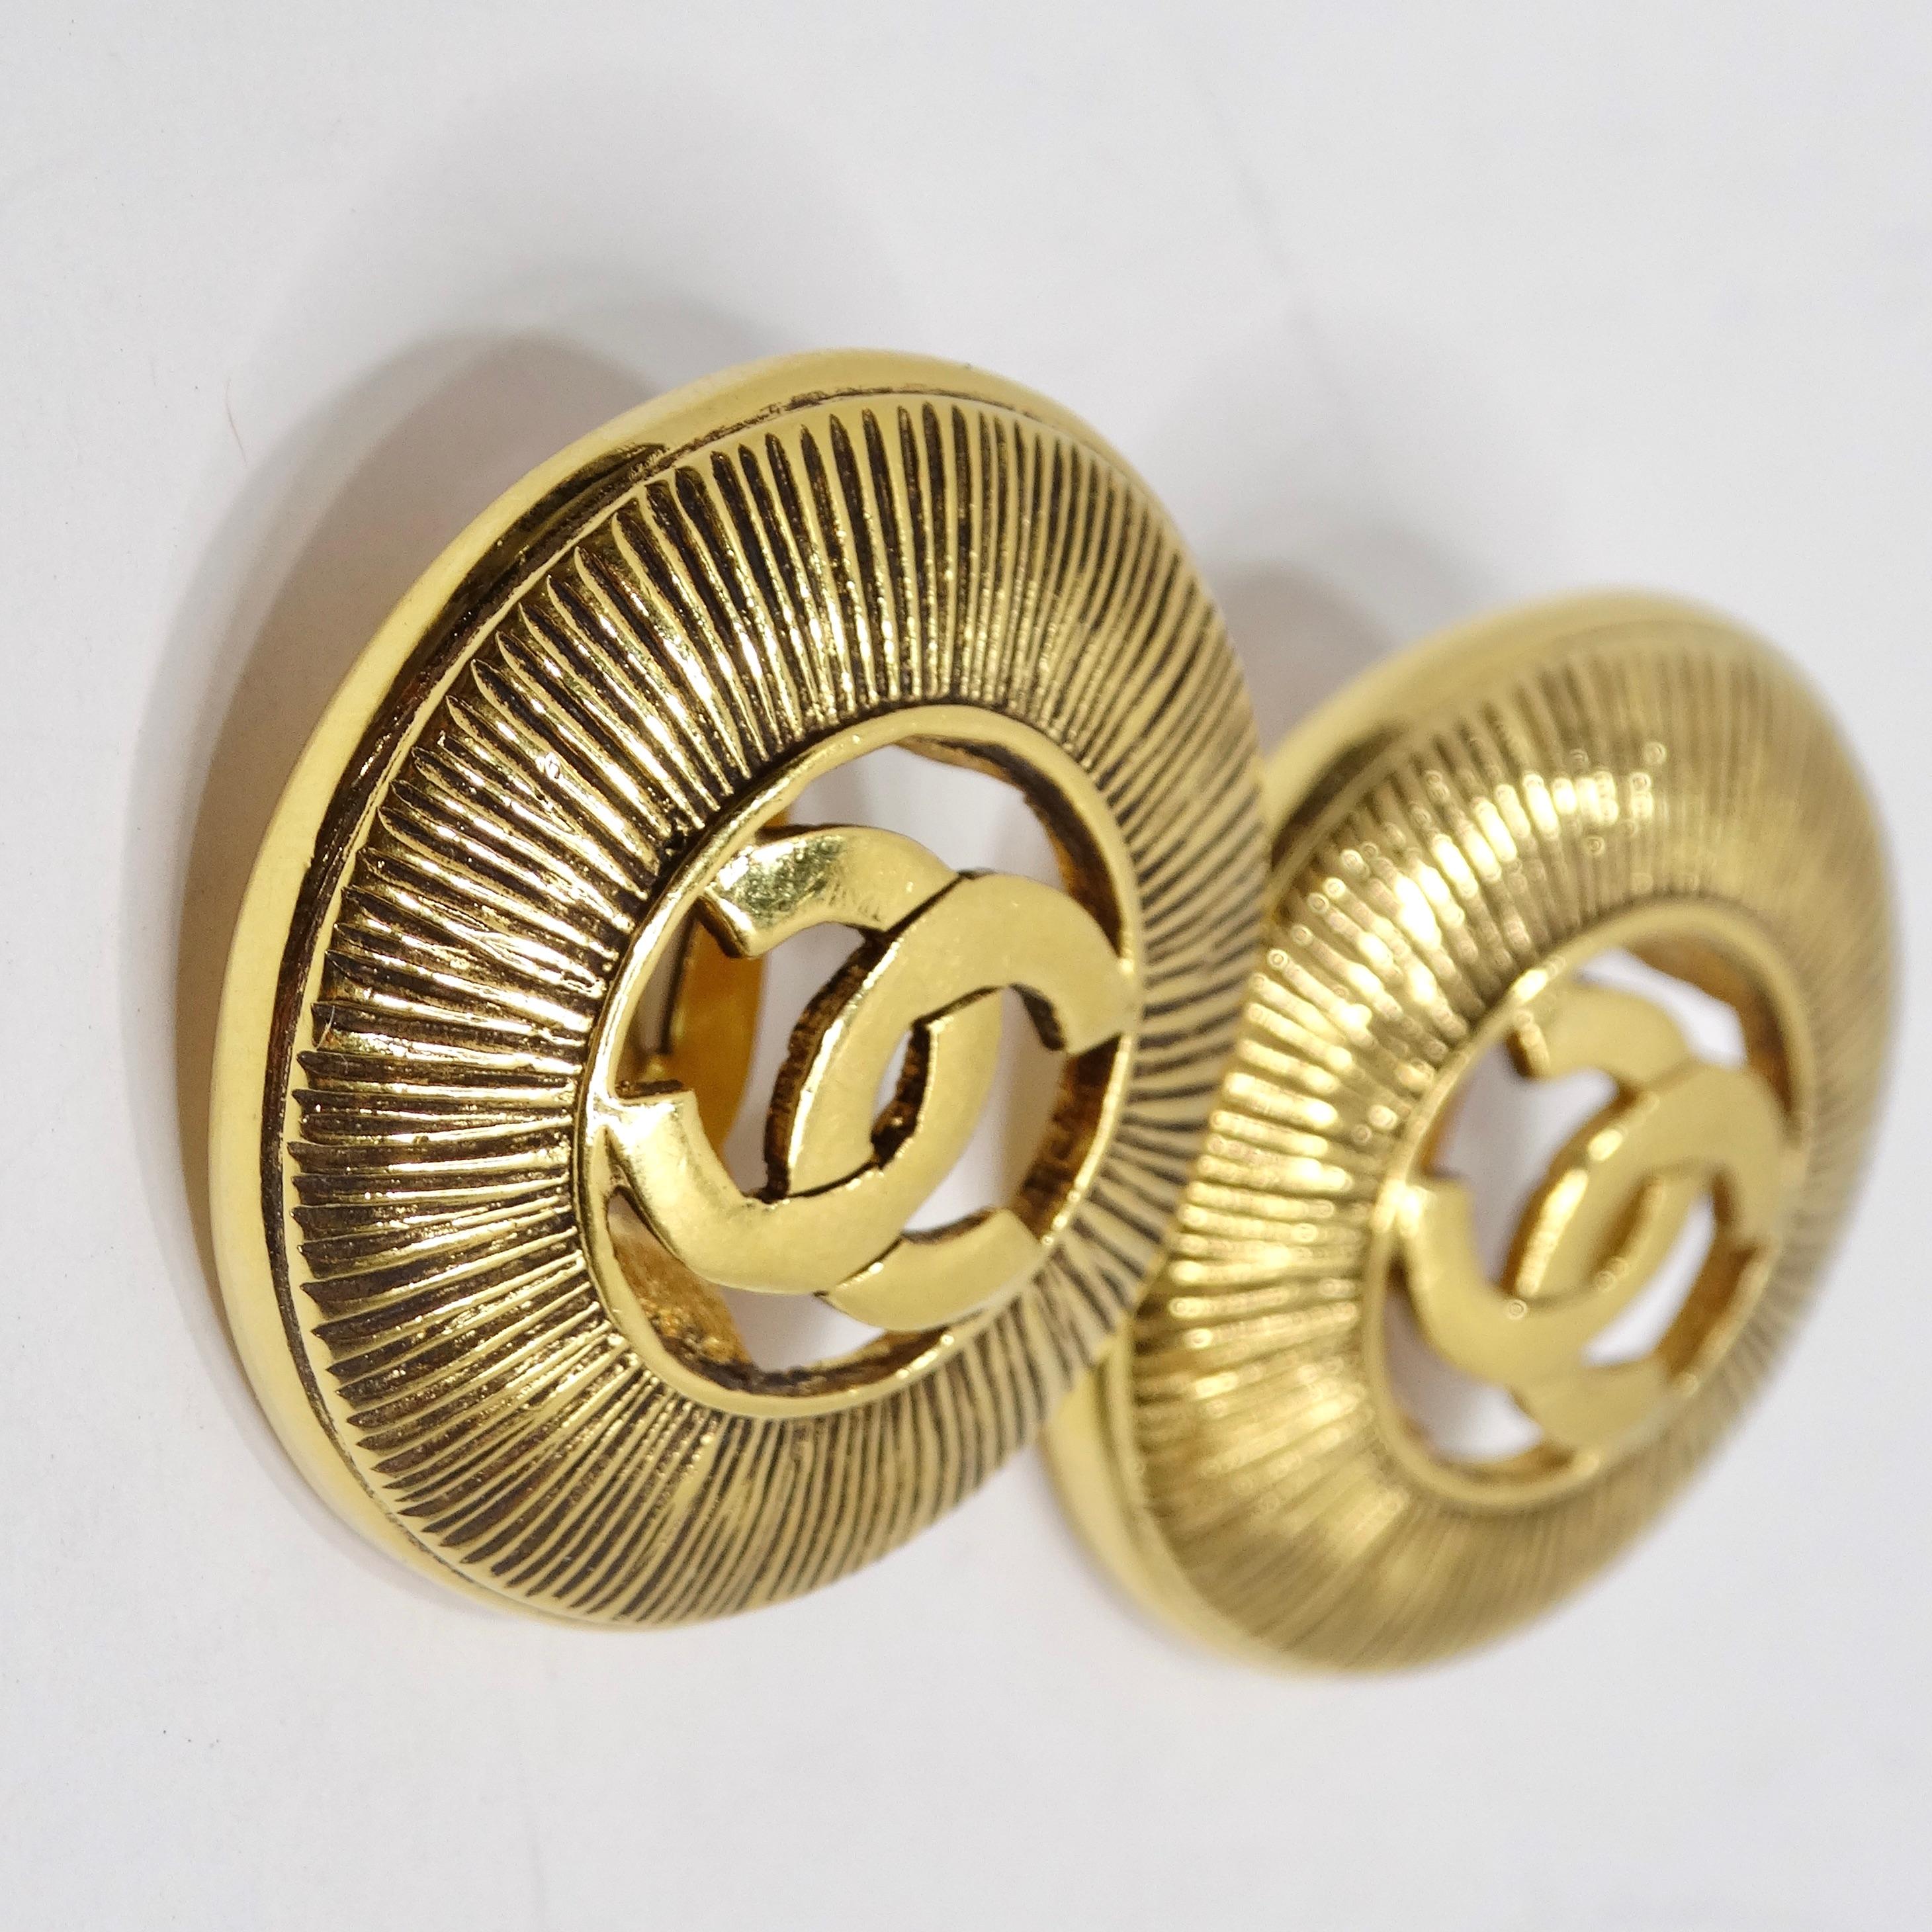 Chanel 1990s Gold Tone CC Starburst Earrings In Excellent Condition For Sale In Scottsdale, AZ